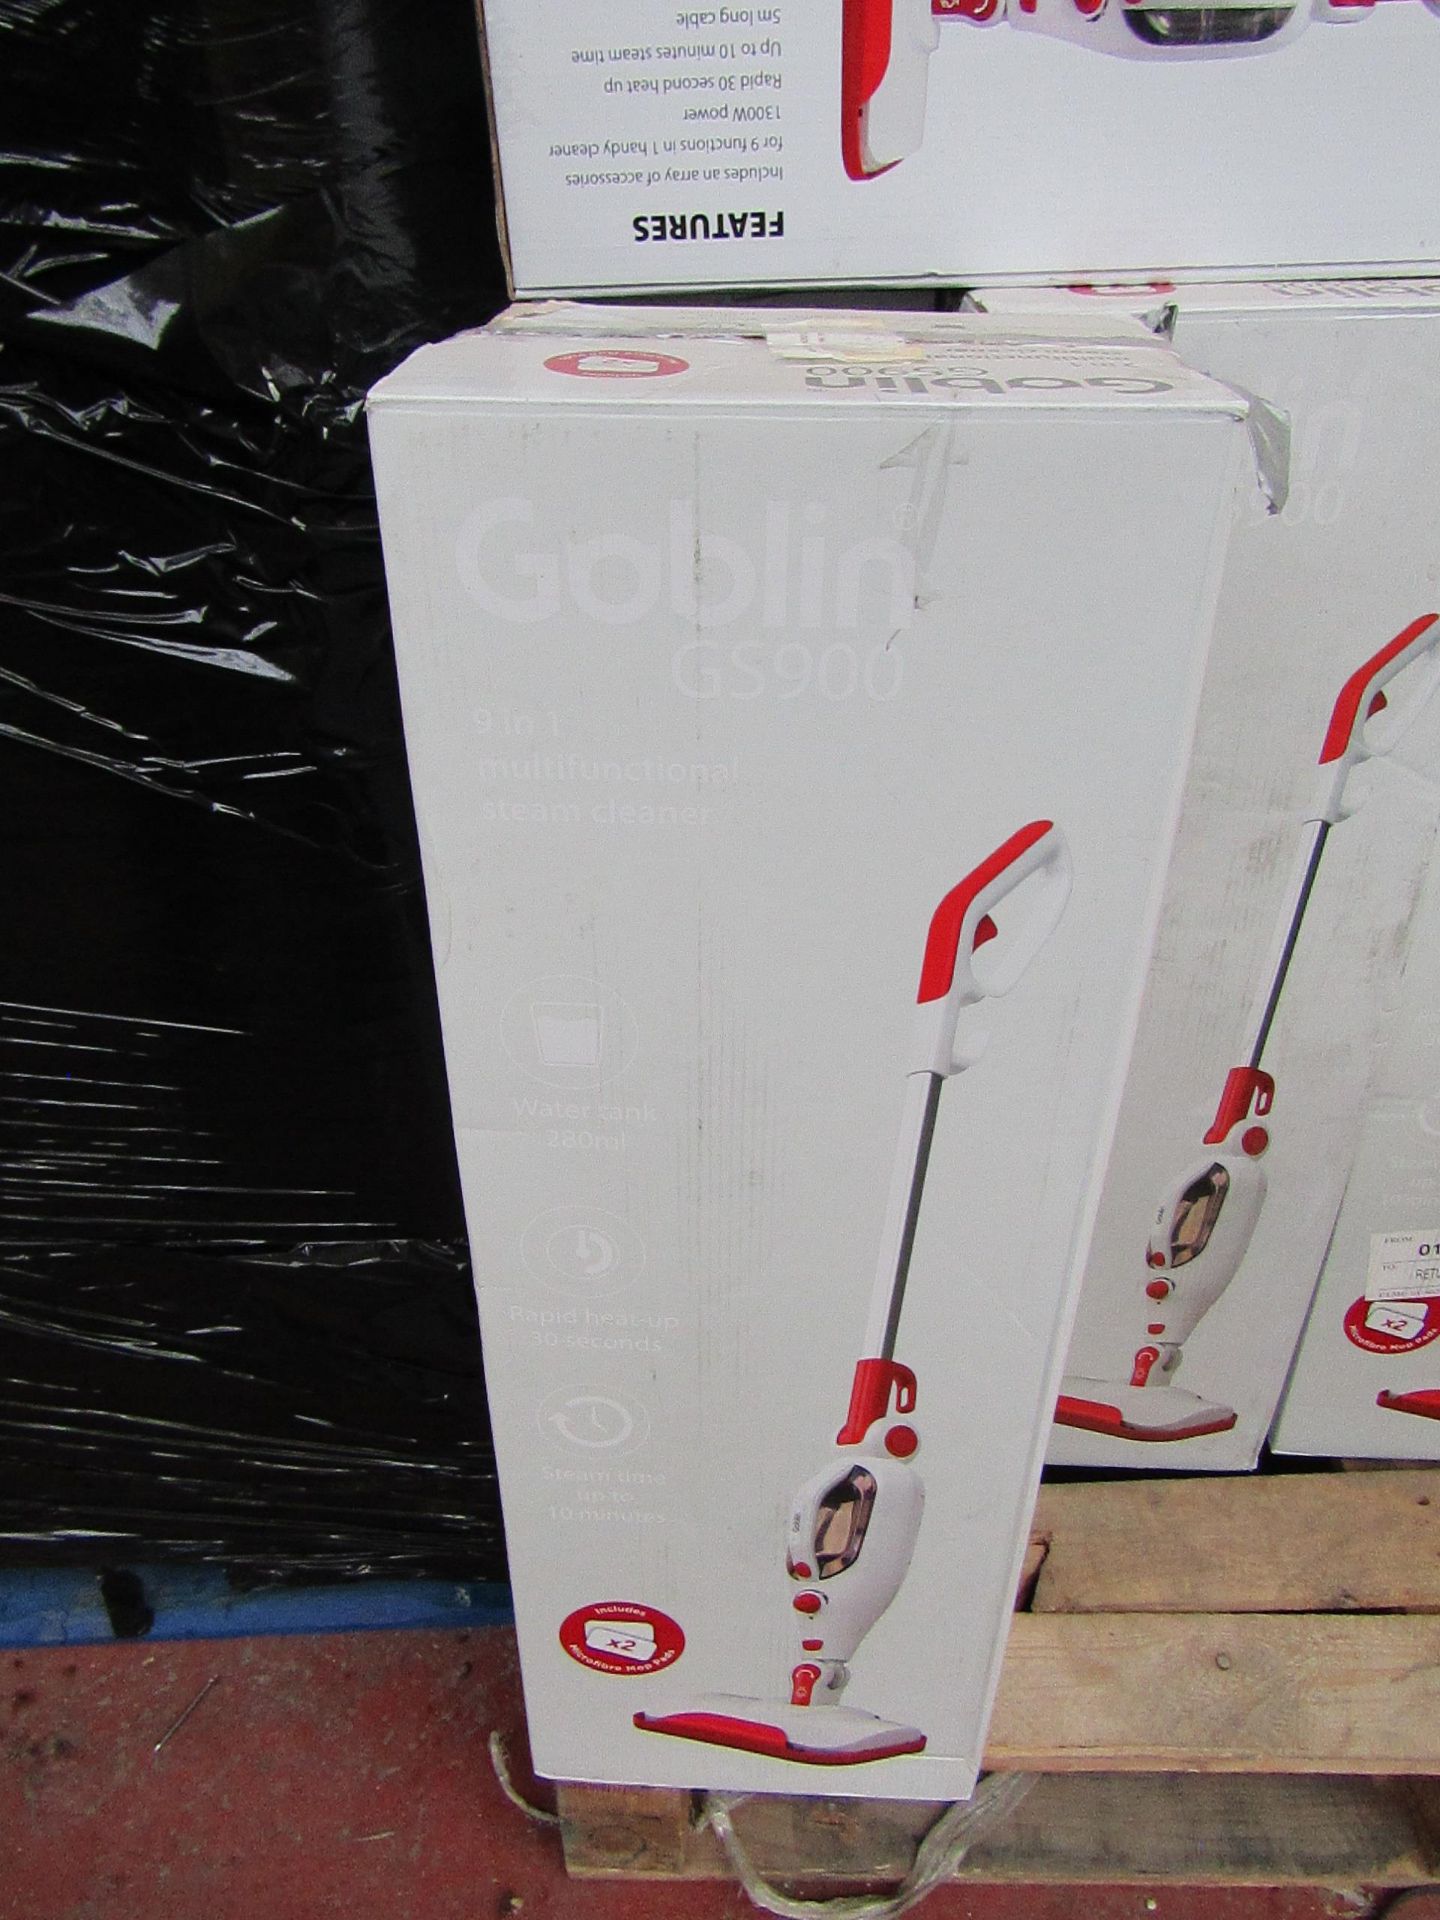 | 1X | GOBLIN WHITE 9 IN 1 MULTIFUNCTIONAL STEAM CLEANER | UNCHECKED AND BOXED | NO ONLINE